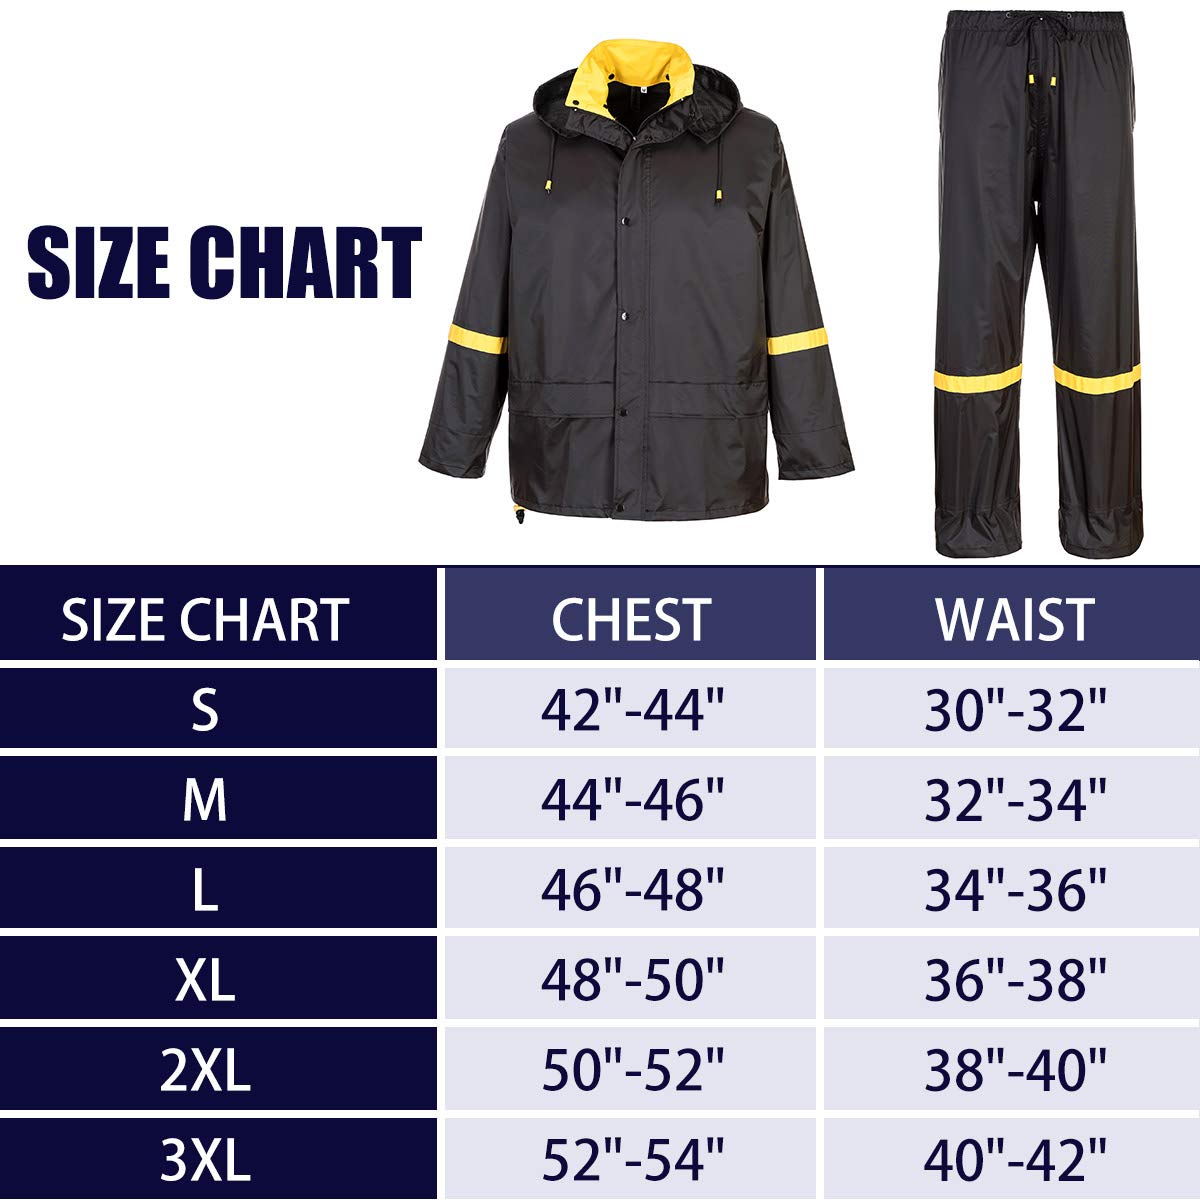 Classic Rain Suits for Men Breathable Rain Gear for Waterproof work, Hooded Coats Jacket and Pants